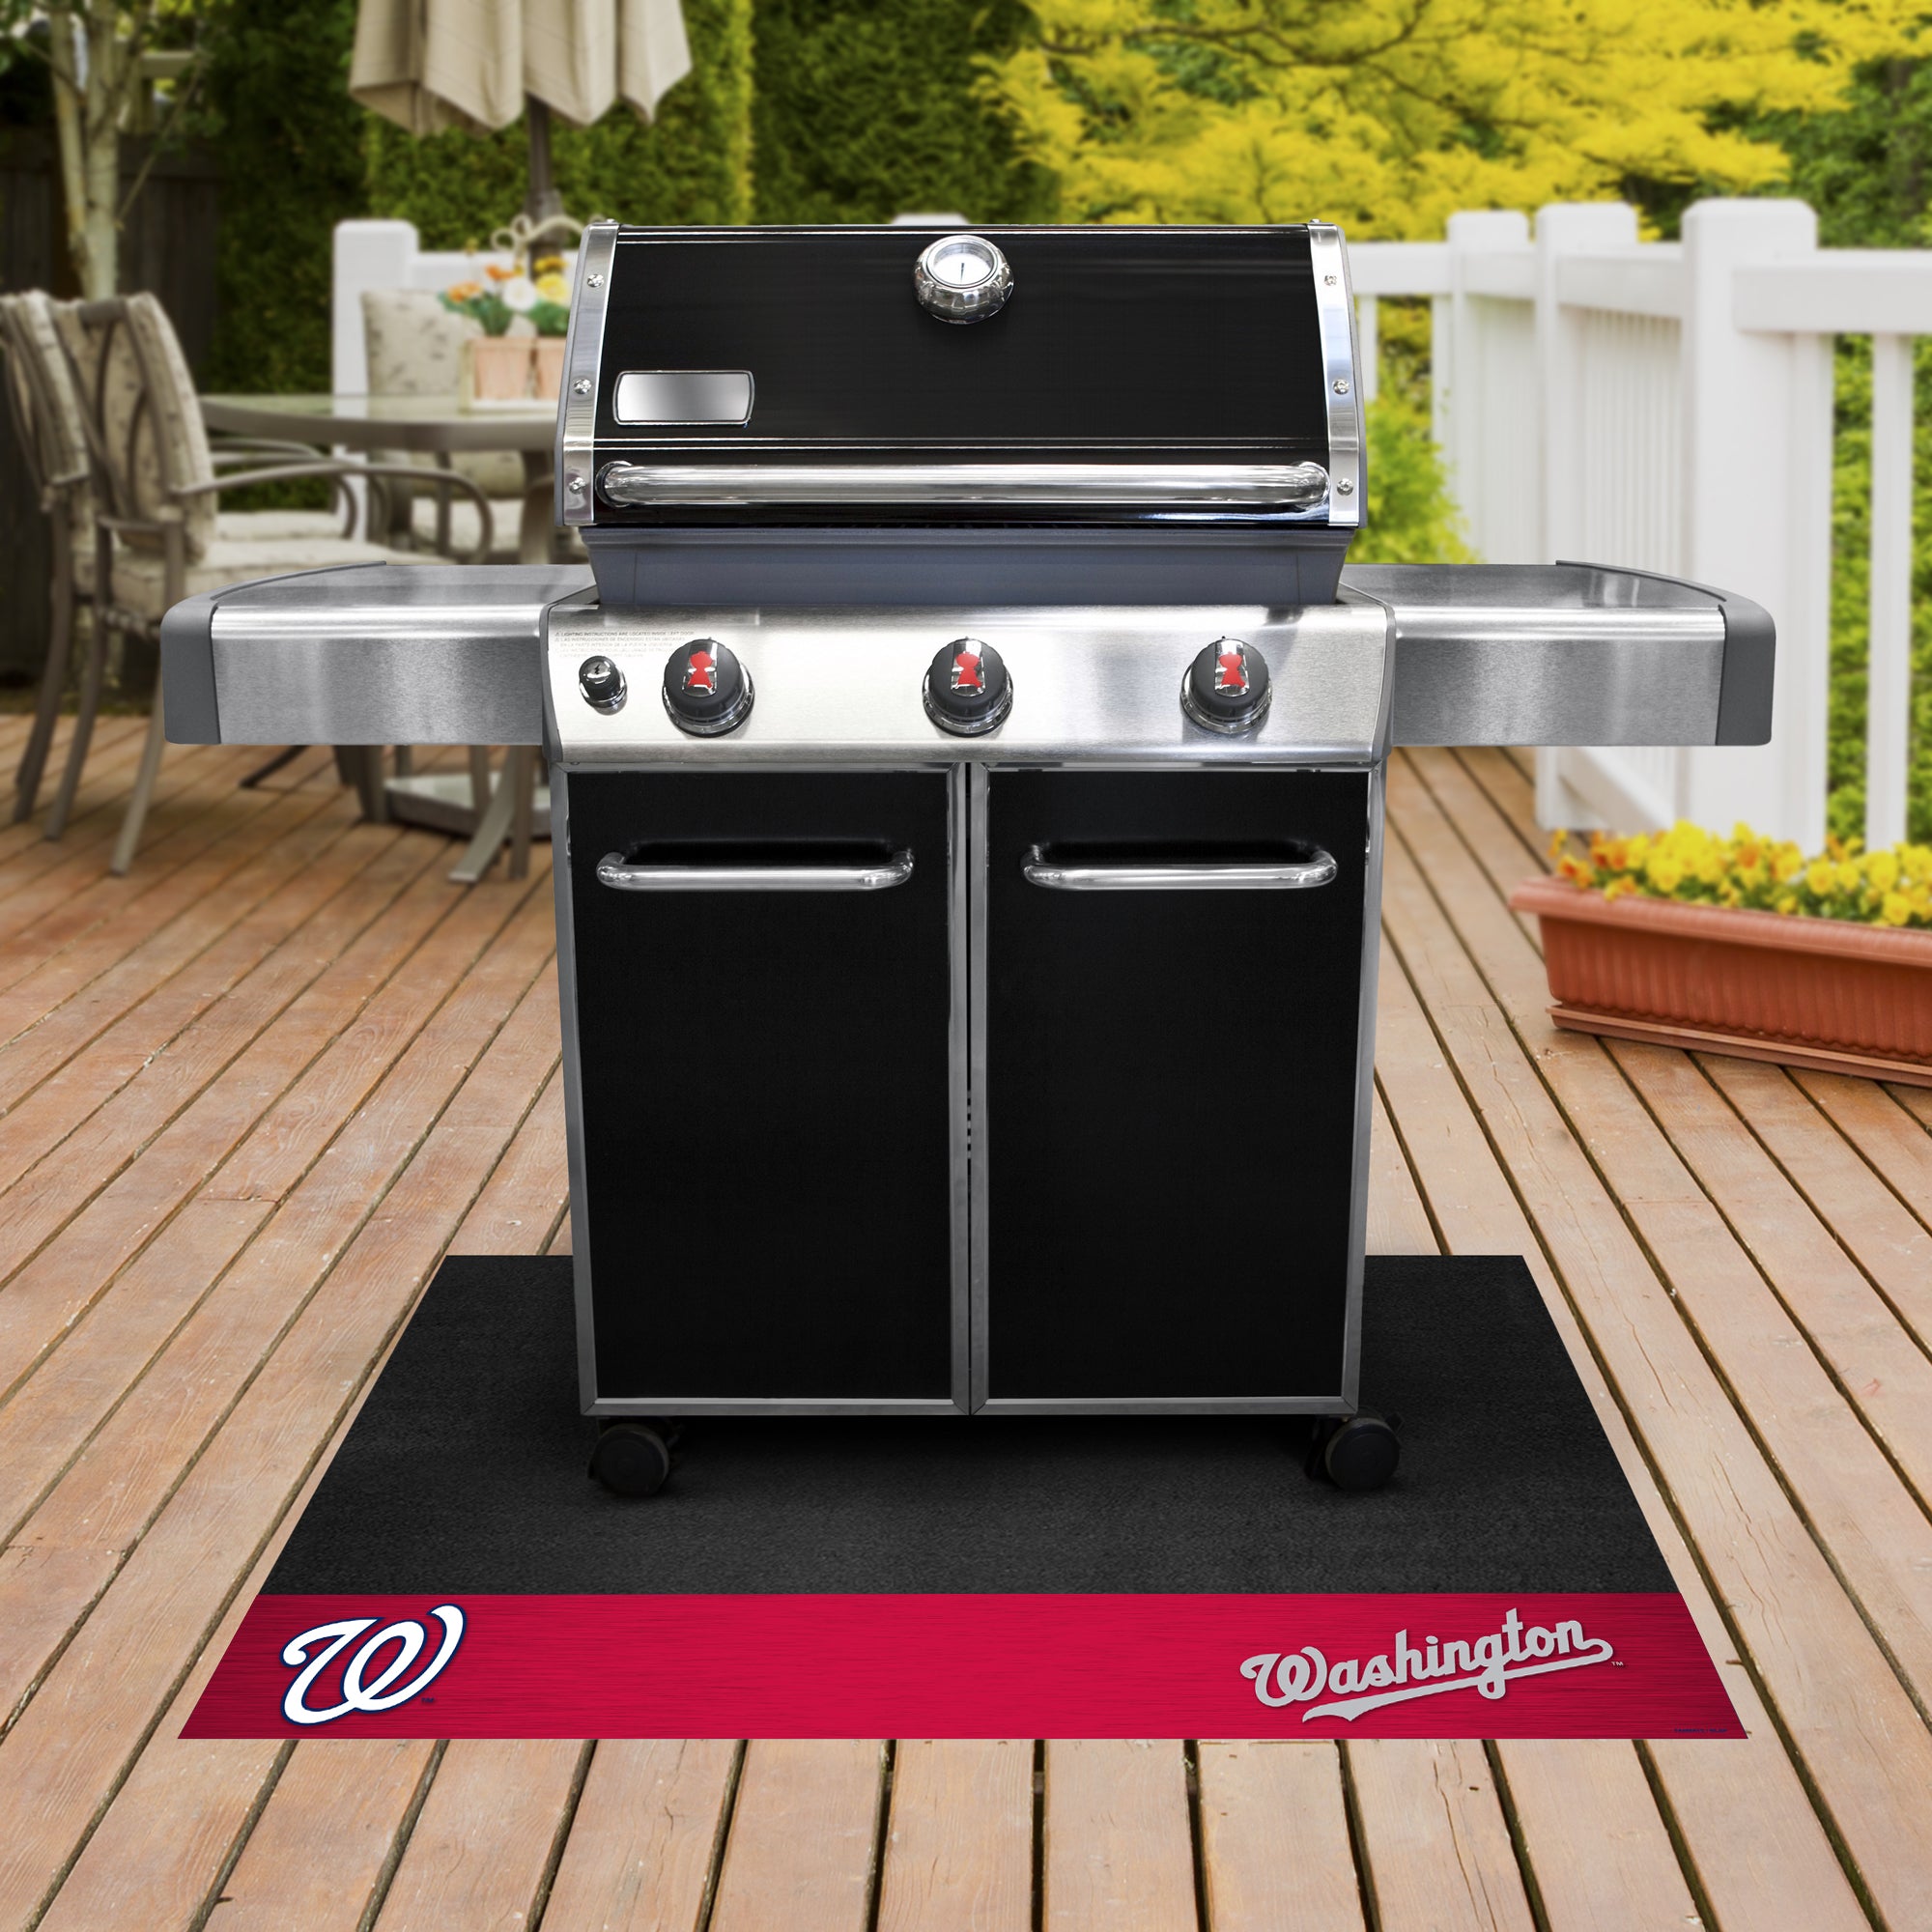 FANMATS, MLB - Washington Nationals Grill Mat - 26in. x 42in.